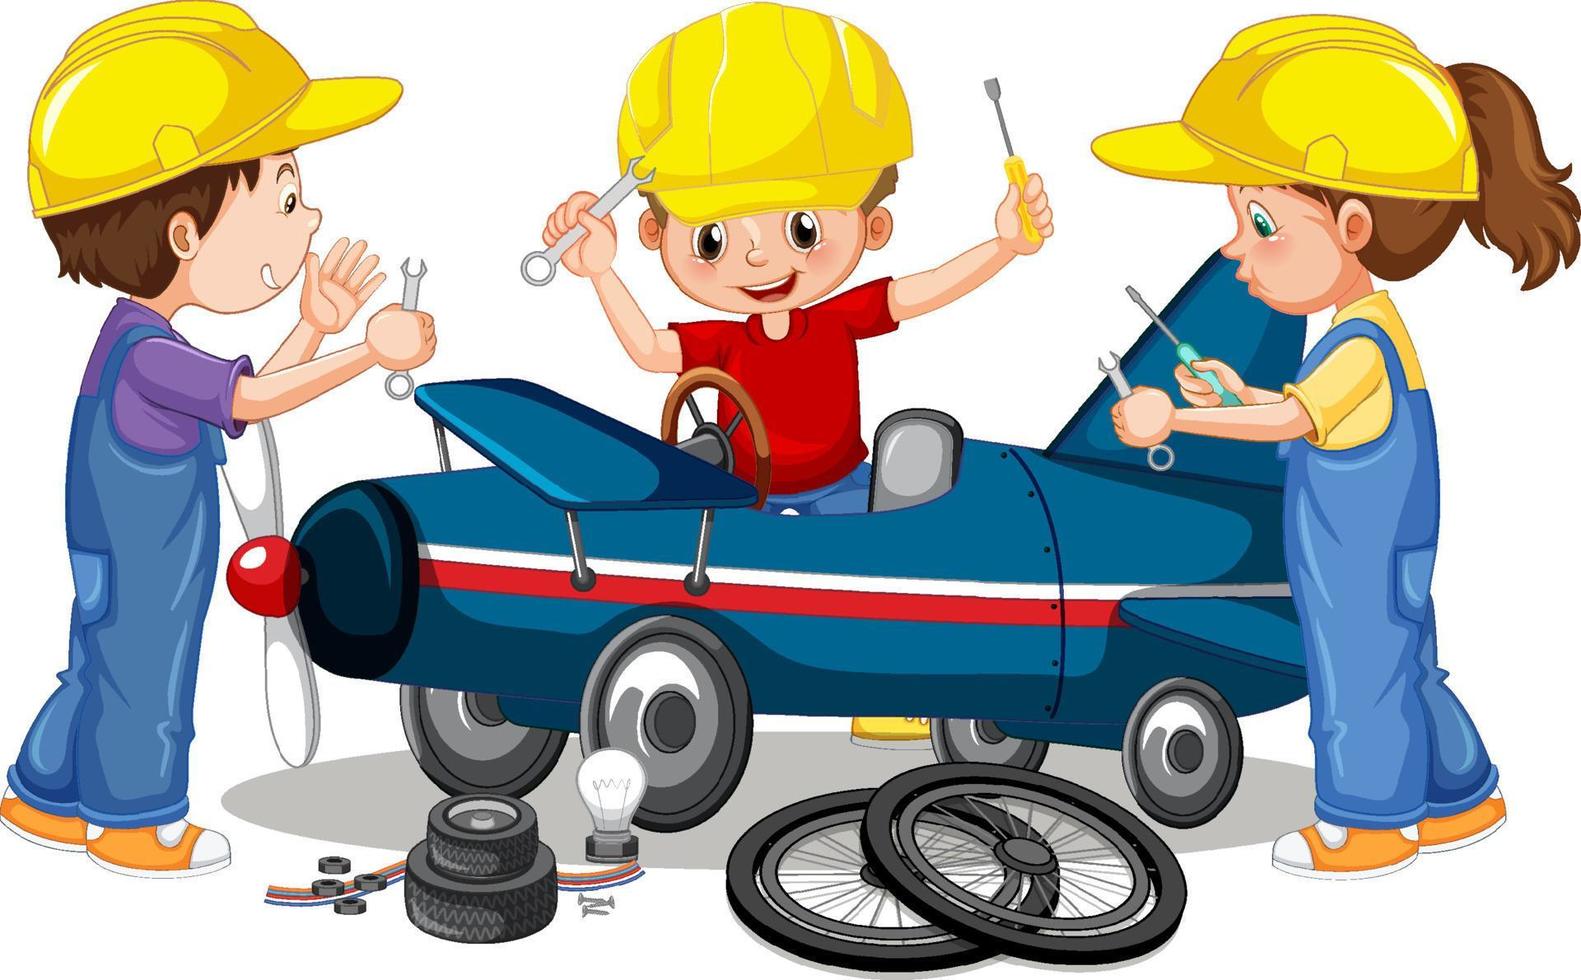 Children repairing a plane together vector